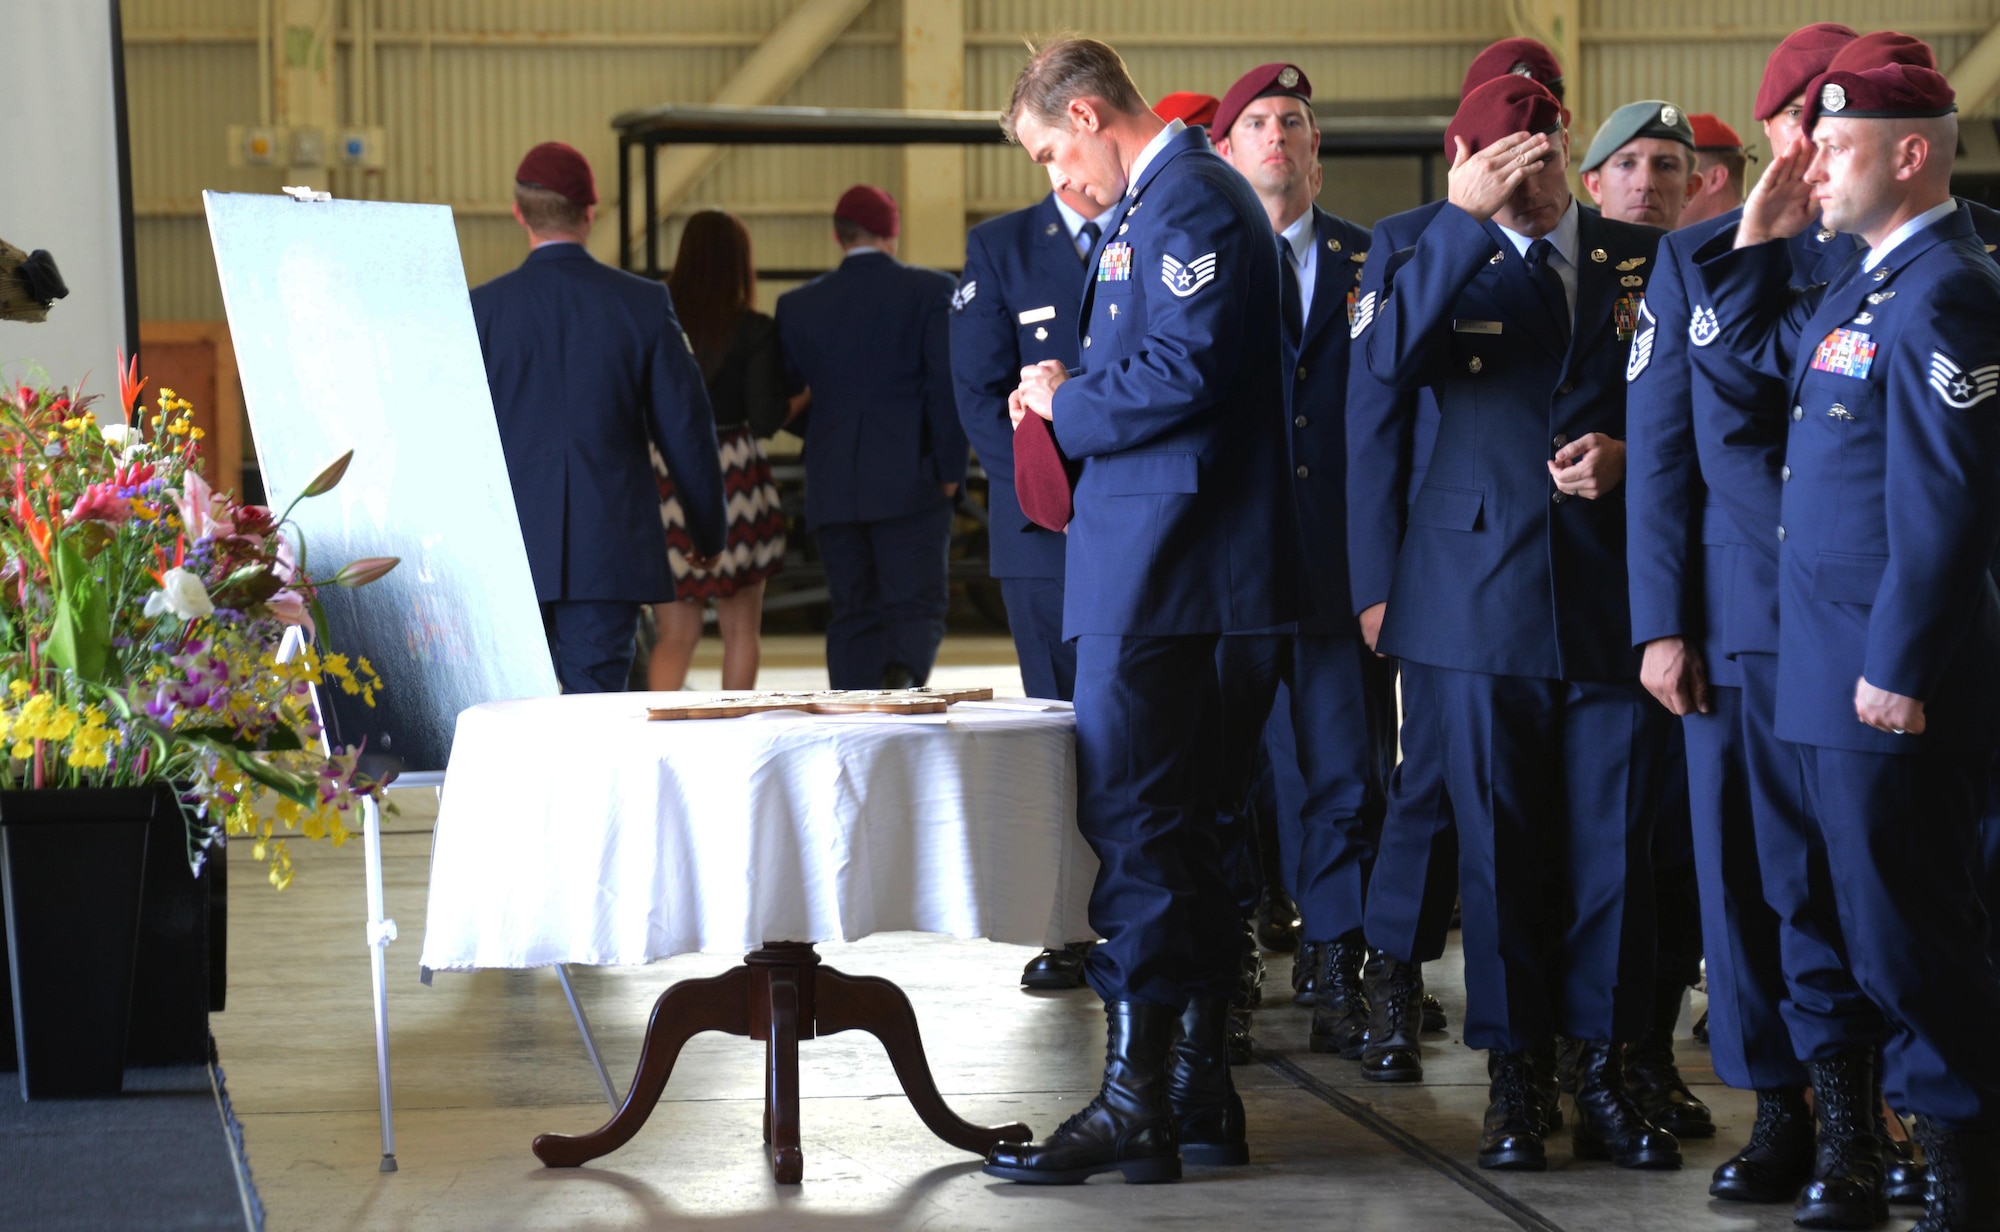 Members from Tech. Sgt. Sean Barton’s team pay their respects at a memorial ceremony held Nov. 25, 2014 at Kadena Air Base, Japan.  Barton, a 320th Special Tactics Squadron pararescueman, died Oct. 30 from injuries sustained after a rappelling incident during a joint exercise training event near Kathmandu, Nepal.  (U.S. Air Force photo by Tech. Sgt. Kristine Dreyer)
 
